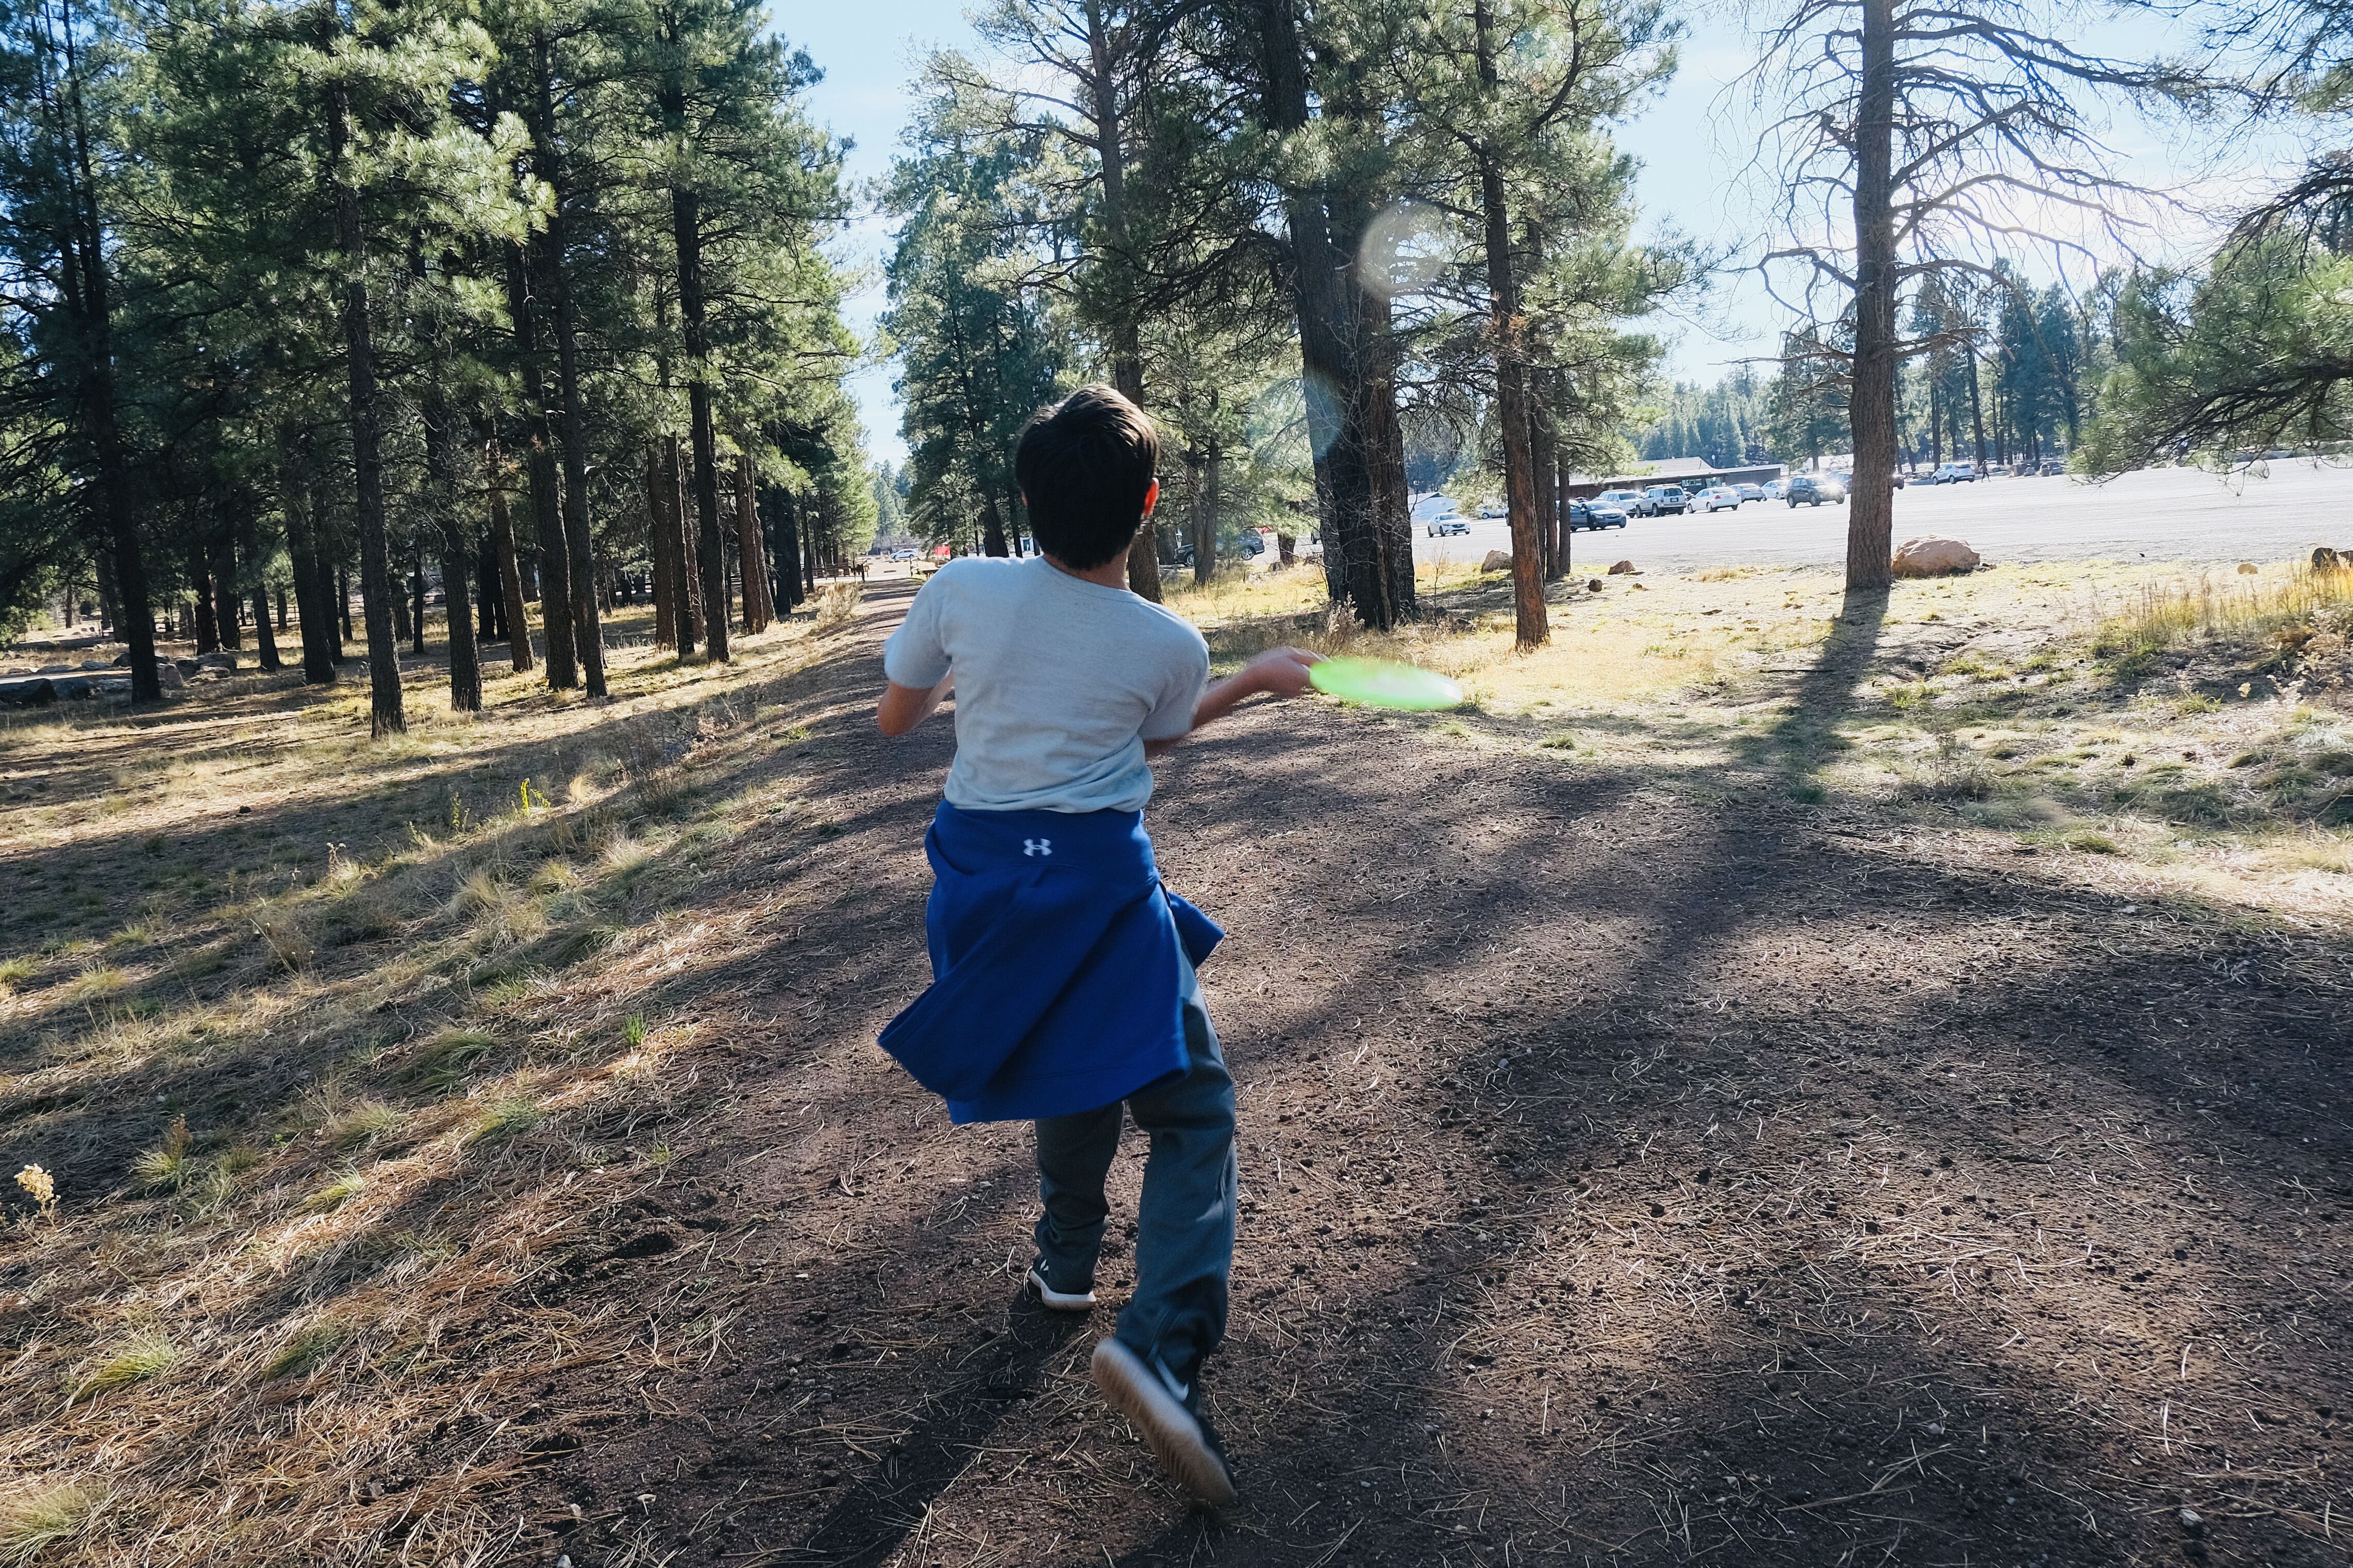 a boy throwing a bright green disc down a path lined by huge ponderosa pines 